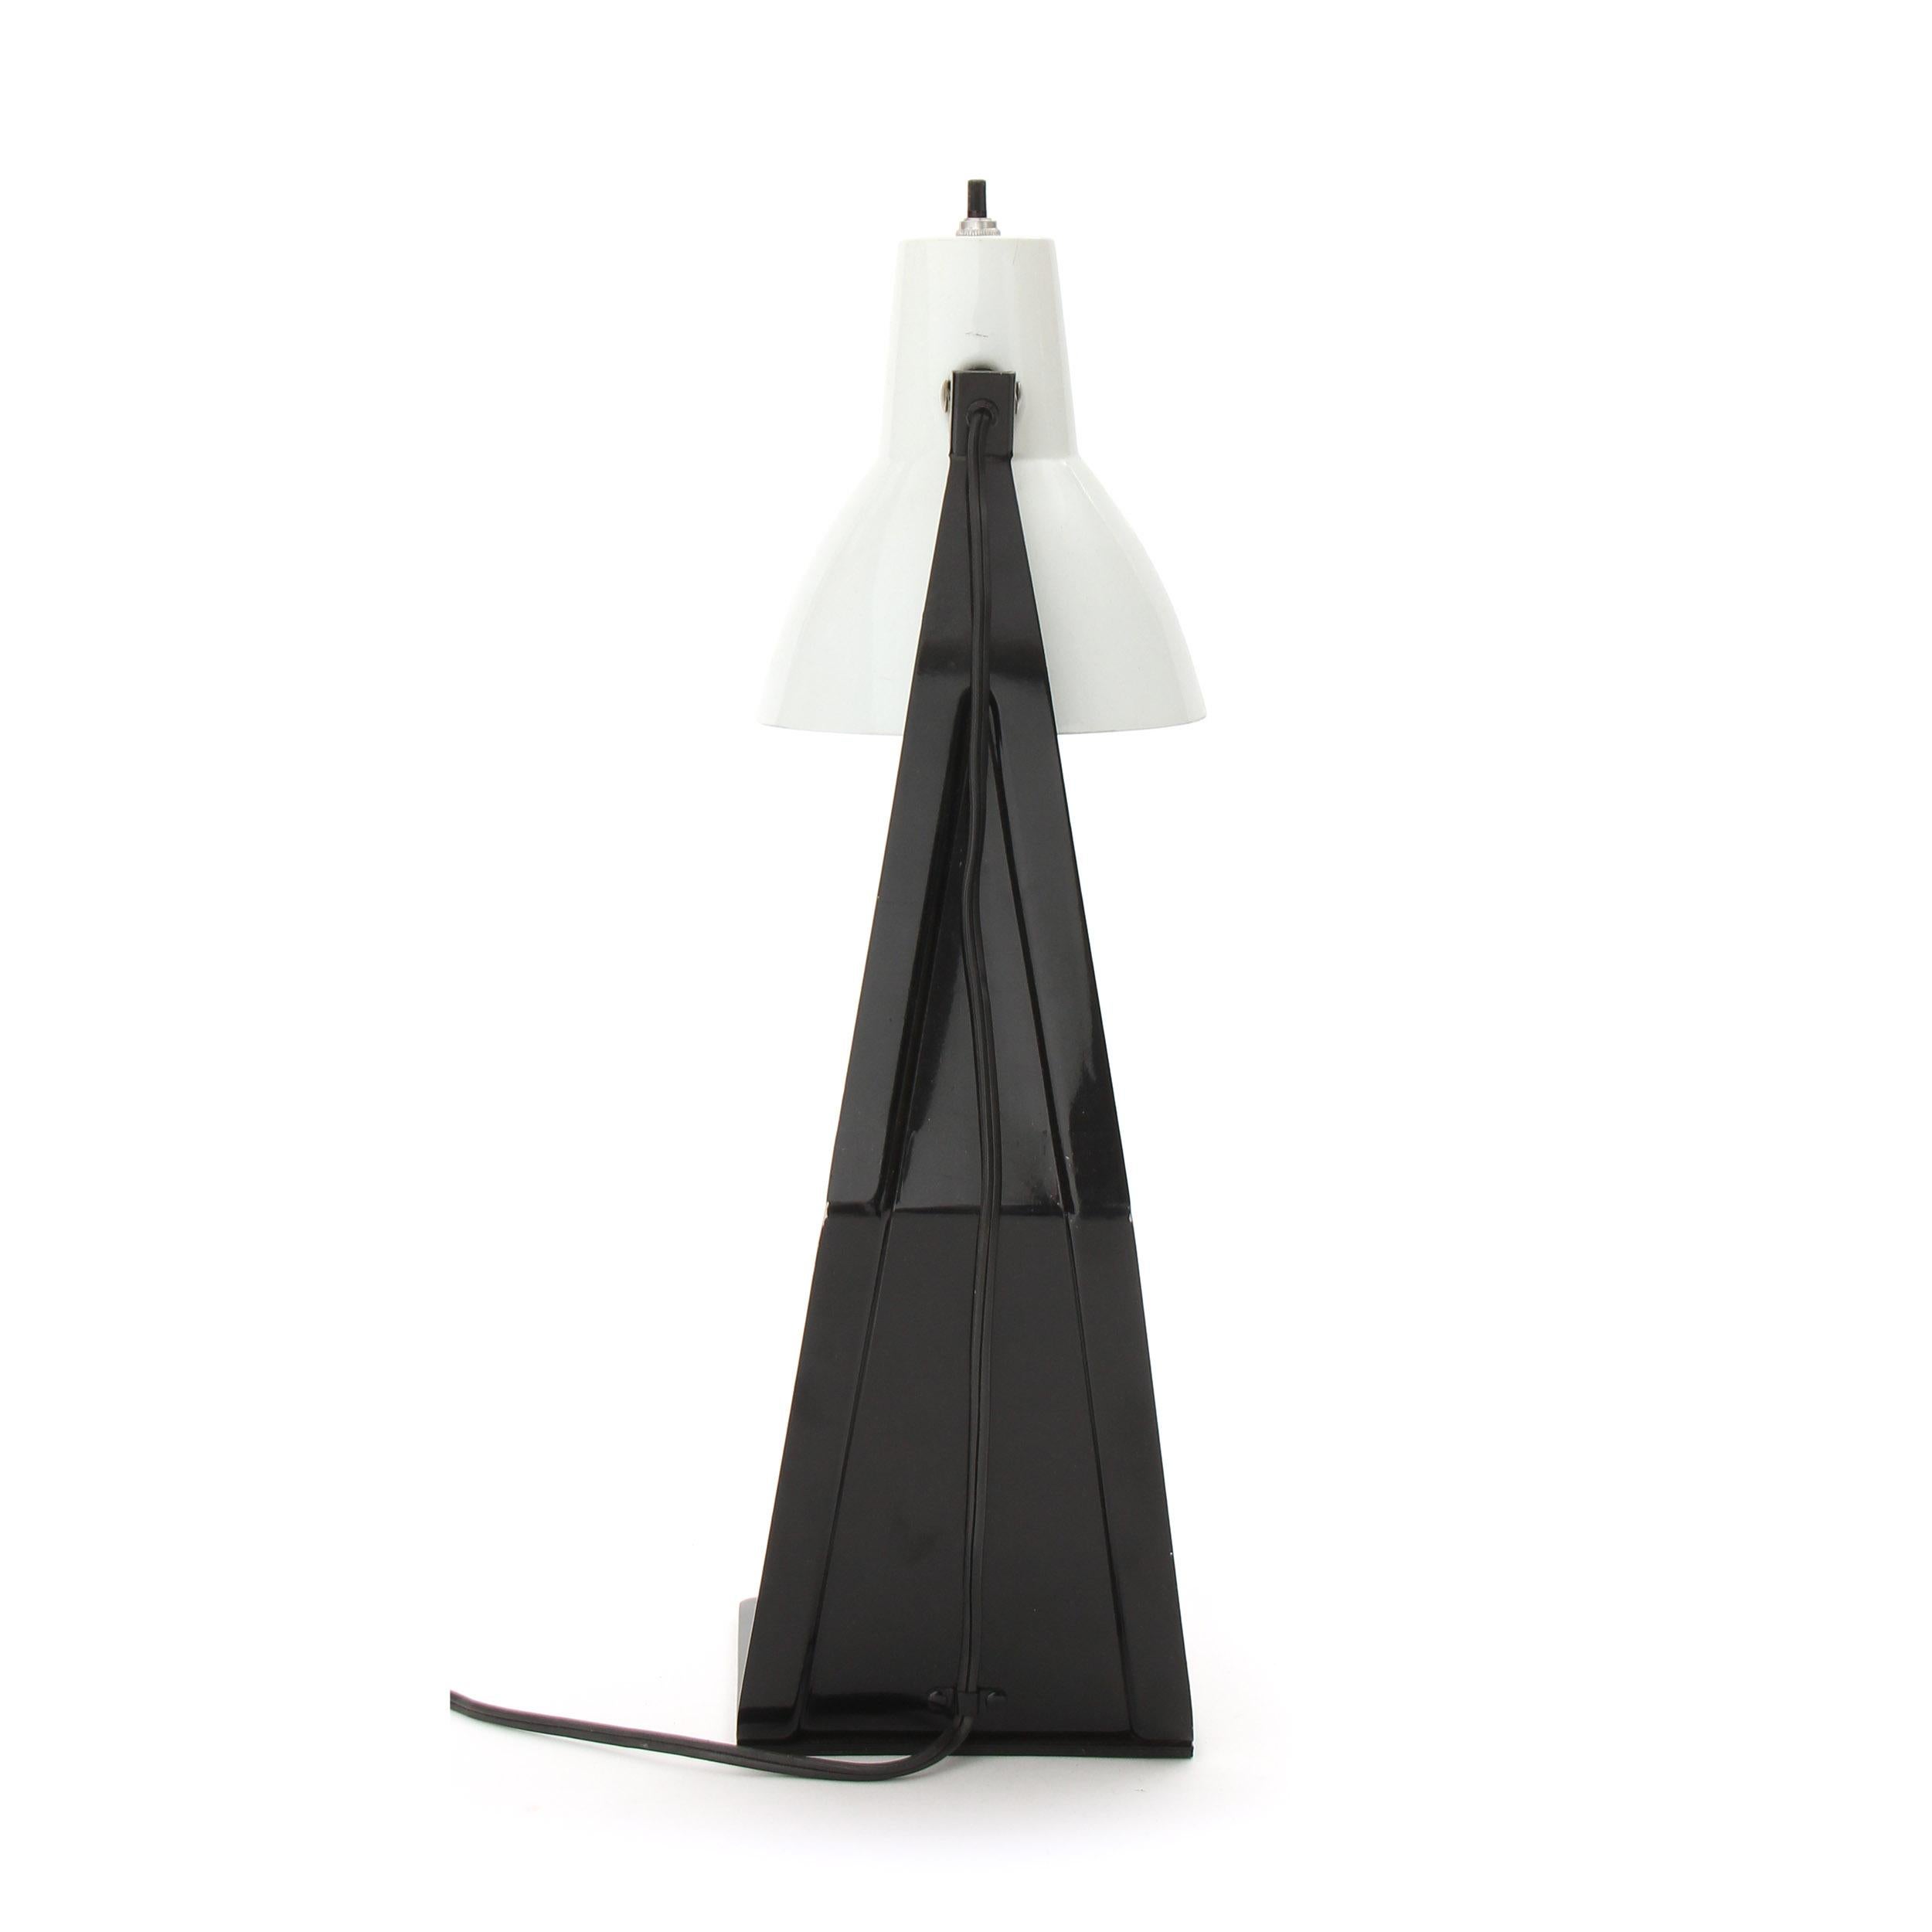 A desk / table lamp made of a singular stamped, die cut and folded piece of metal, painted black with a pivoting shade.